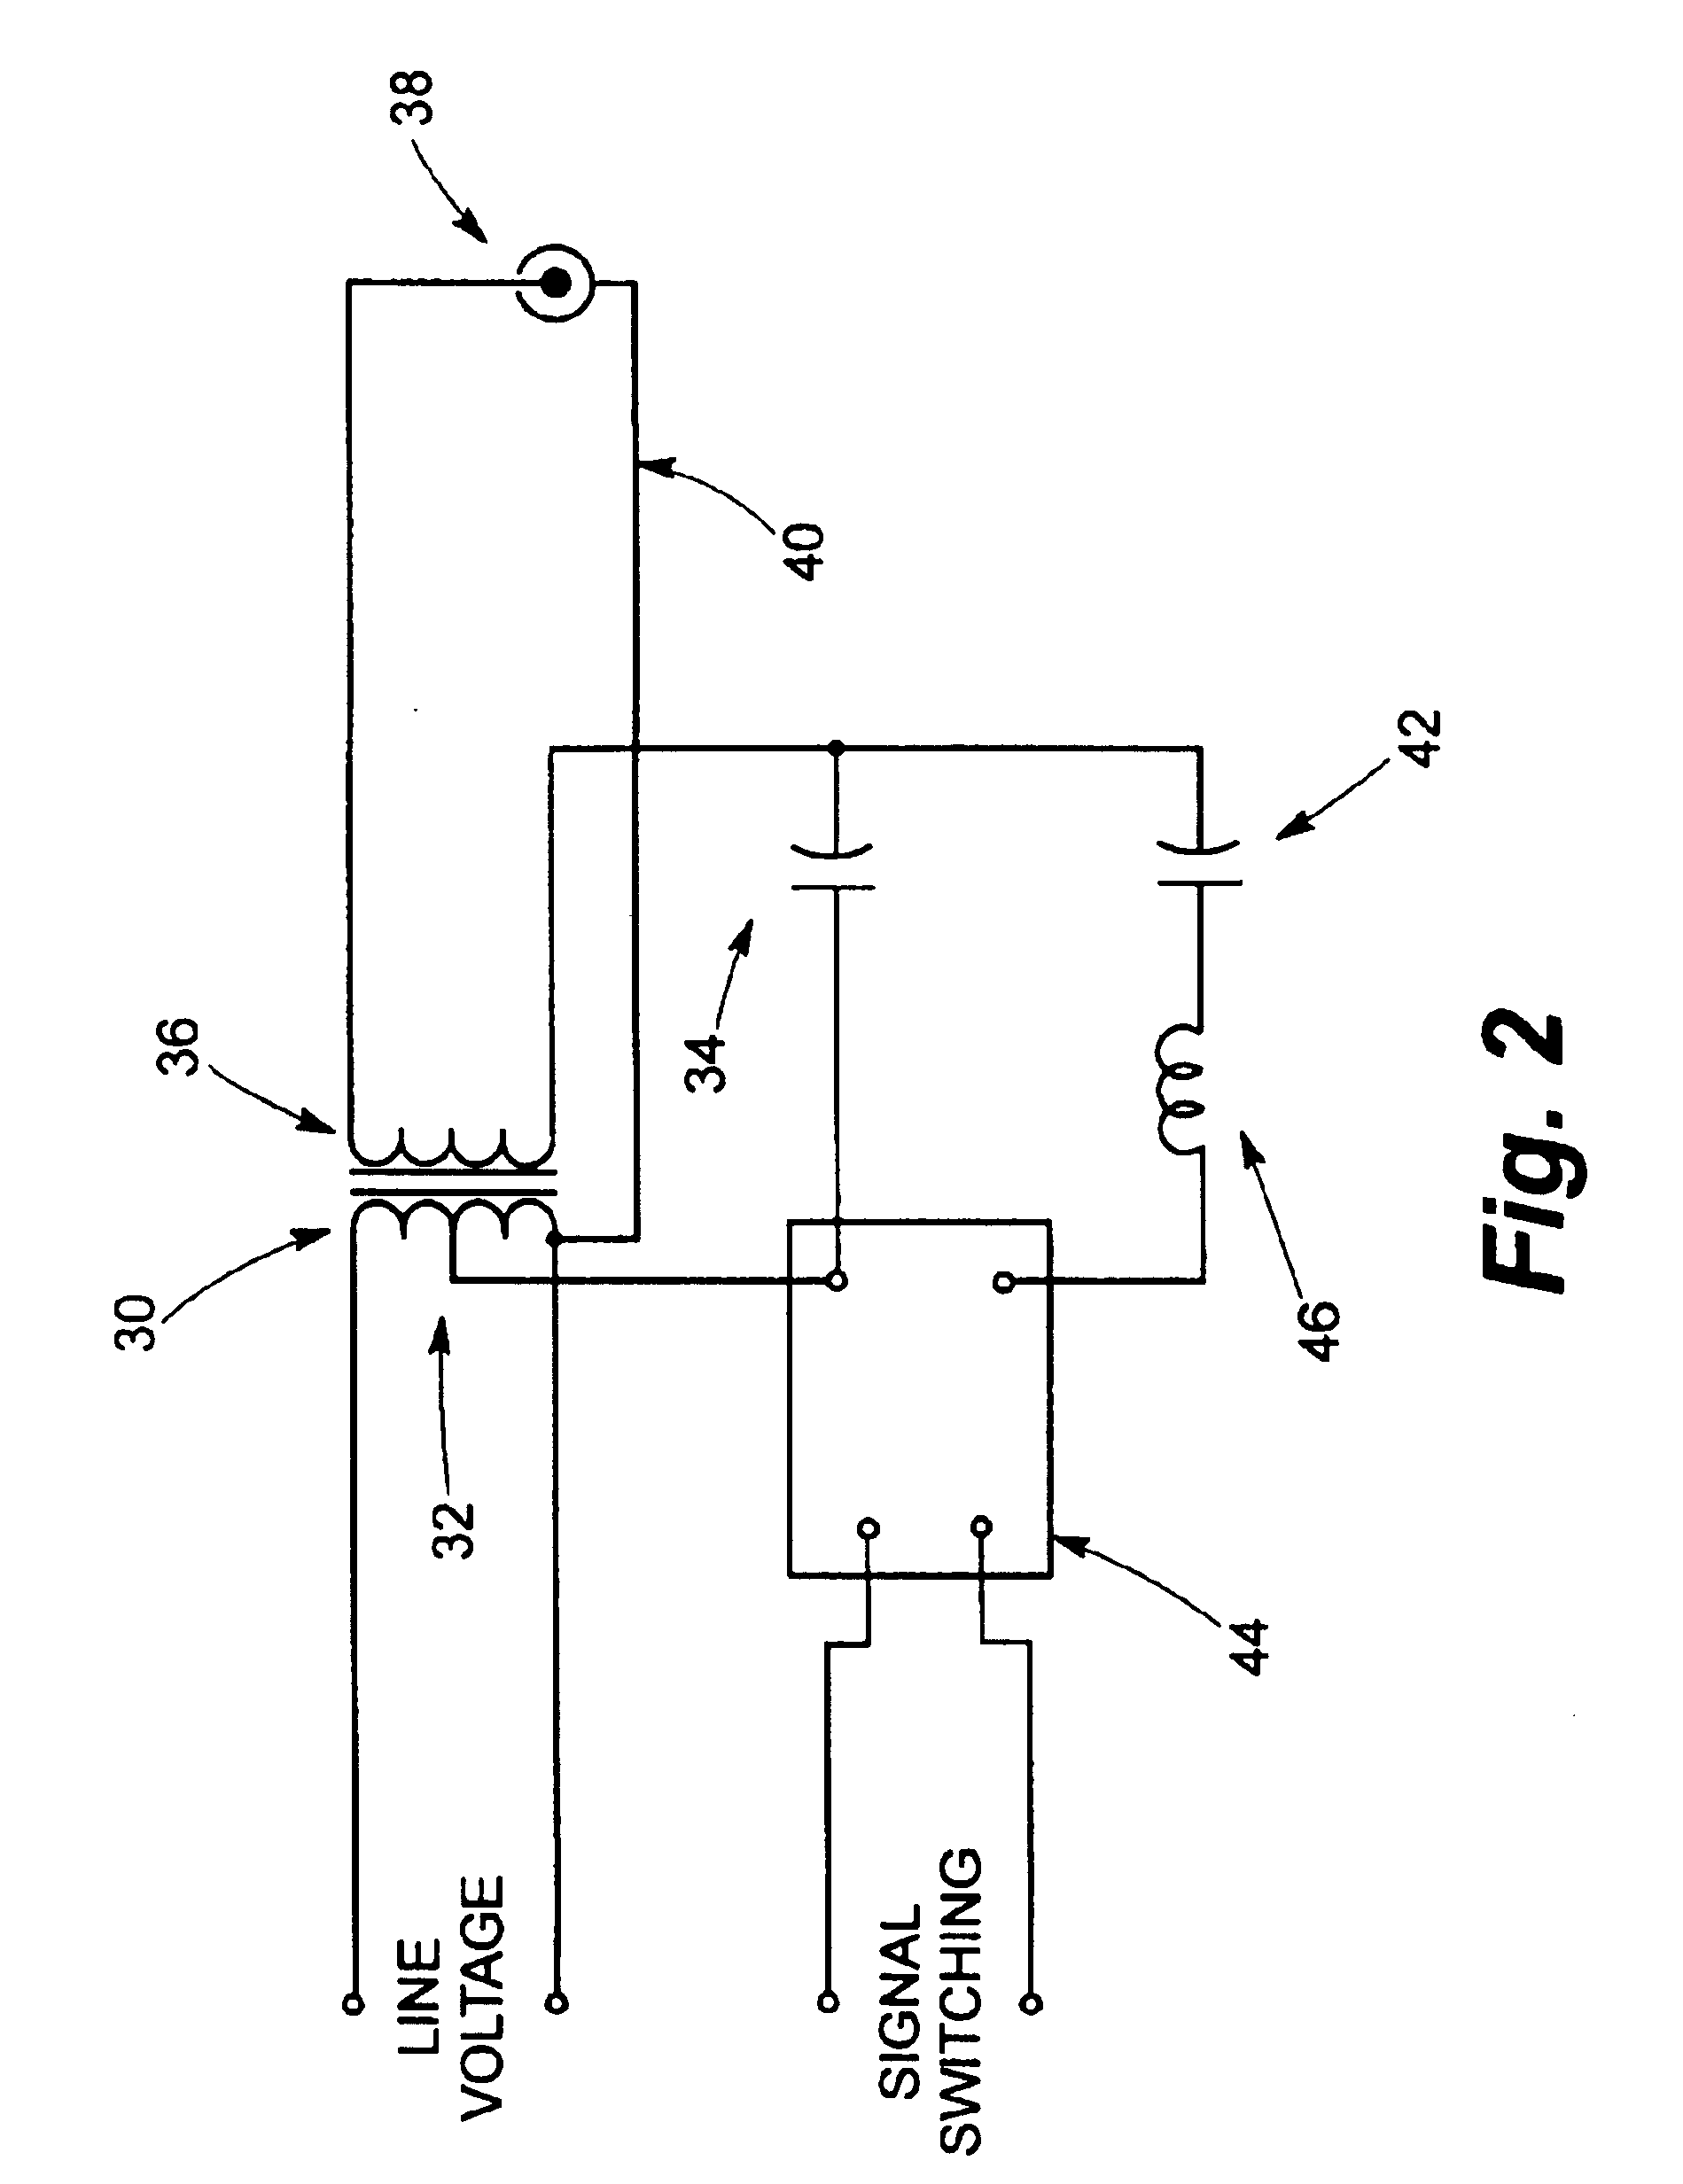 Method and apparatus for switching of parallel capacitors in an HID bi-level dimming system using voltage suppression